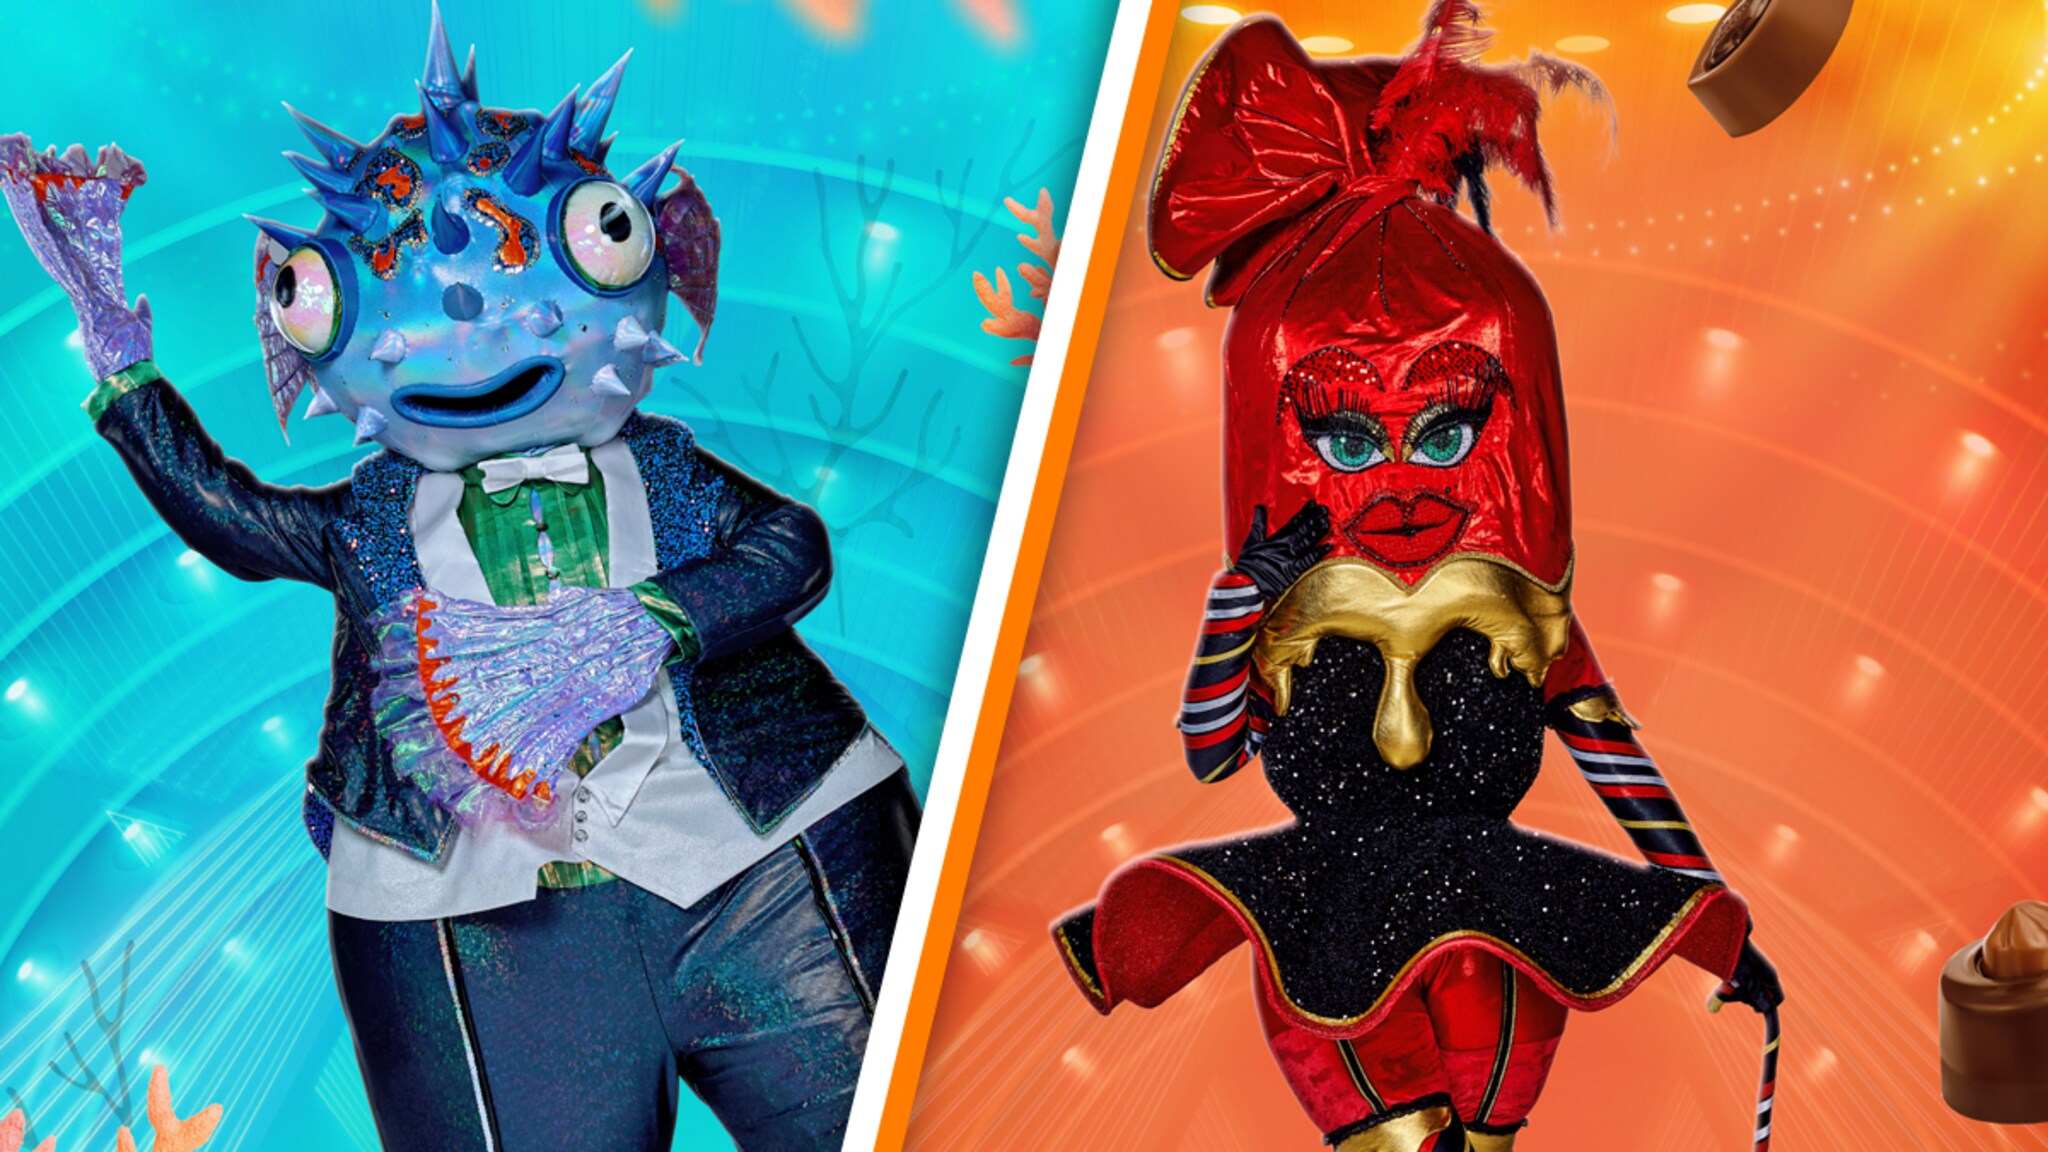 These celebrities revealed themselves tonight on The Masked Singer